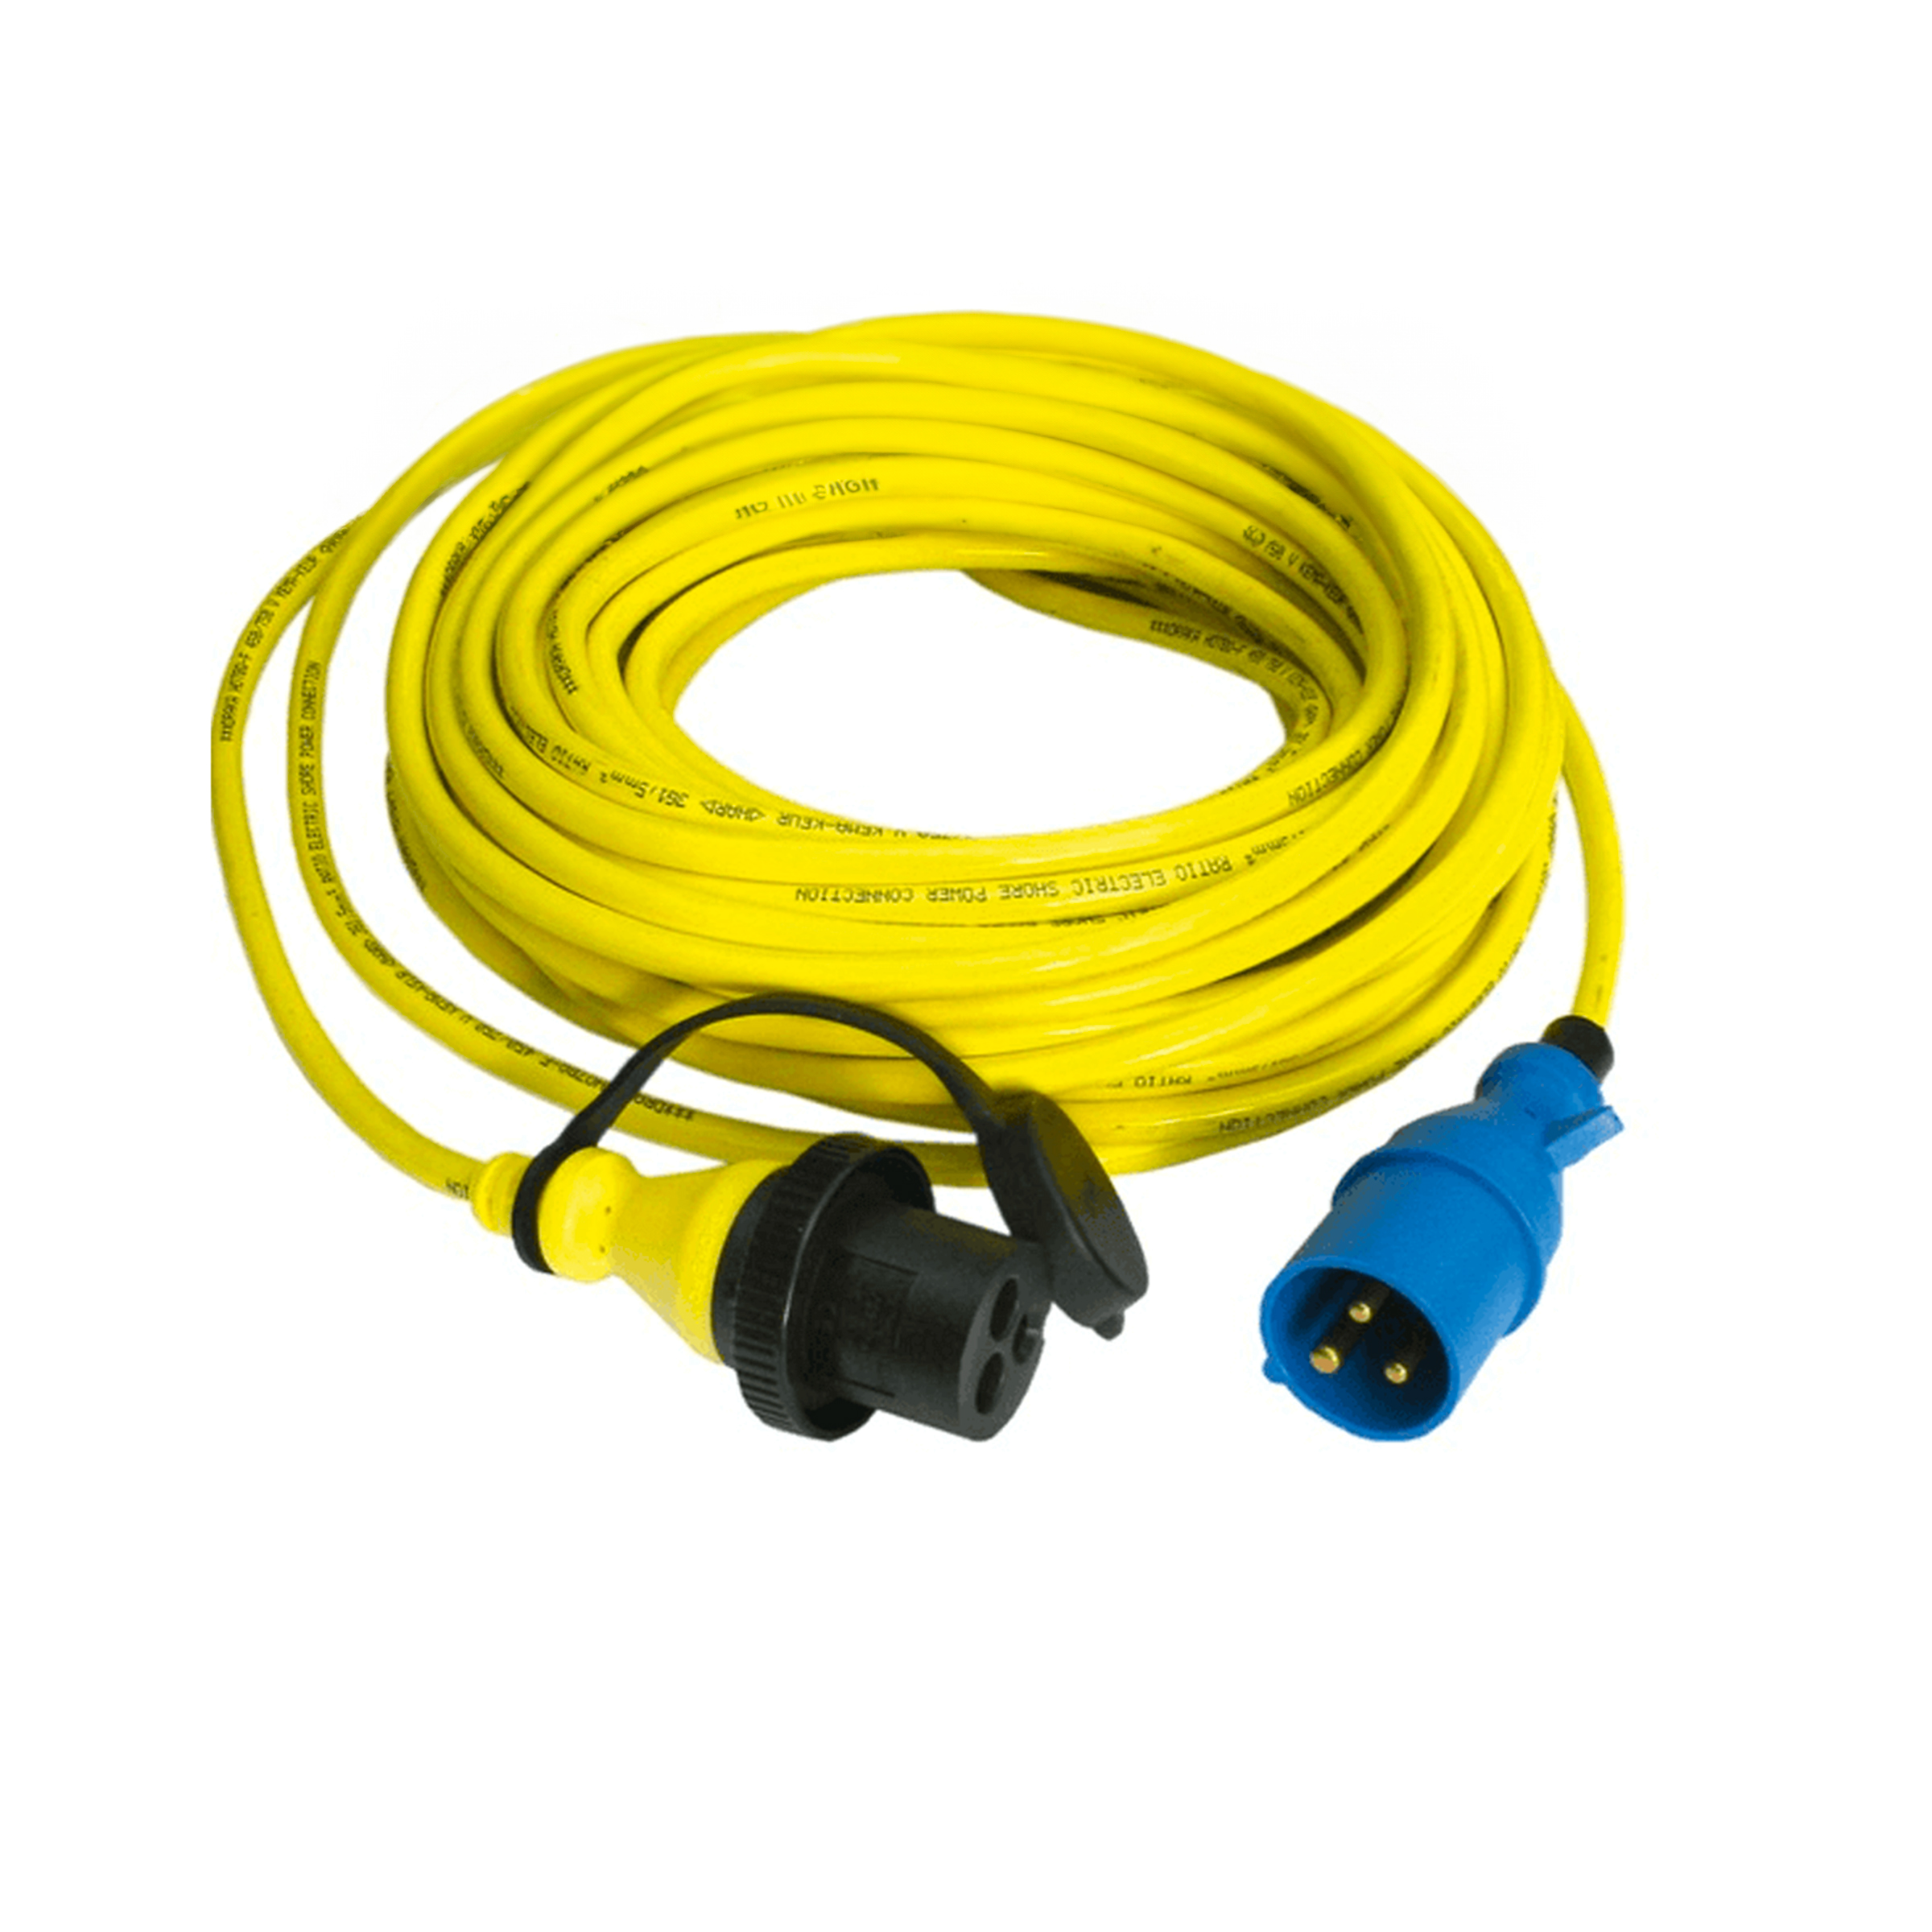 Victron energy shore power cord